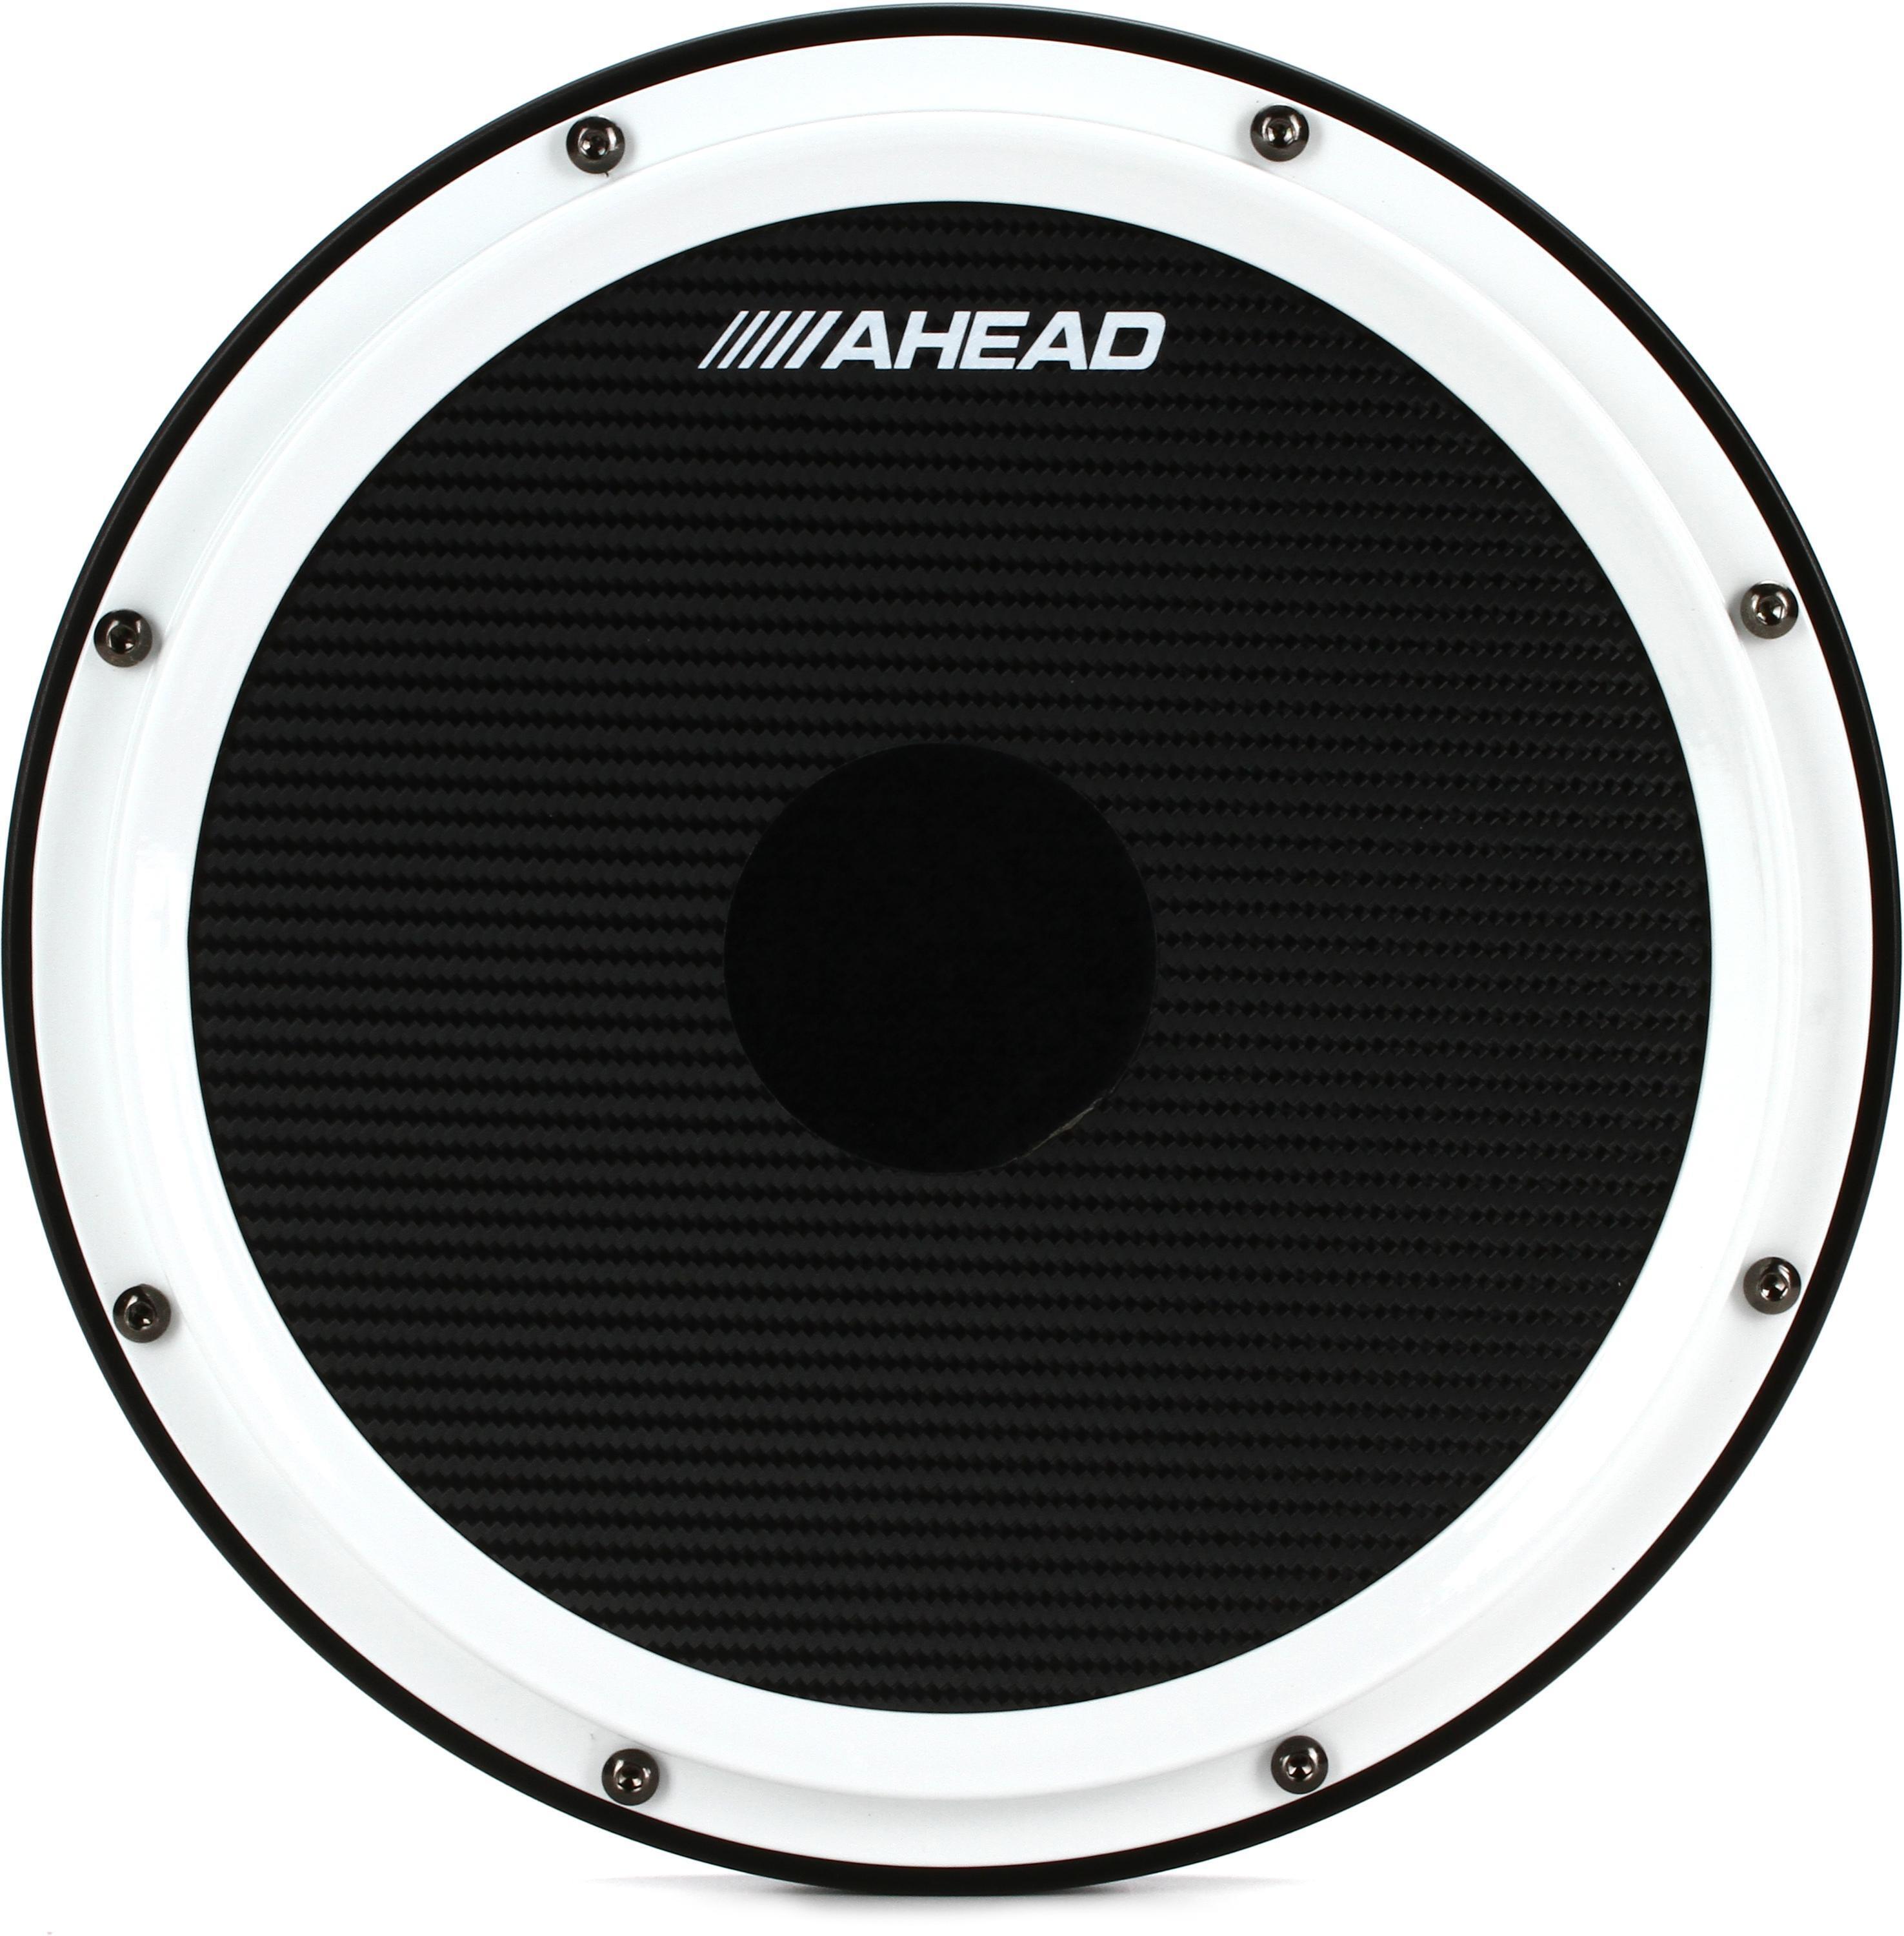 Bundled Item: Ahead S-Hoop Marching Pad with Snare Sound - 14"